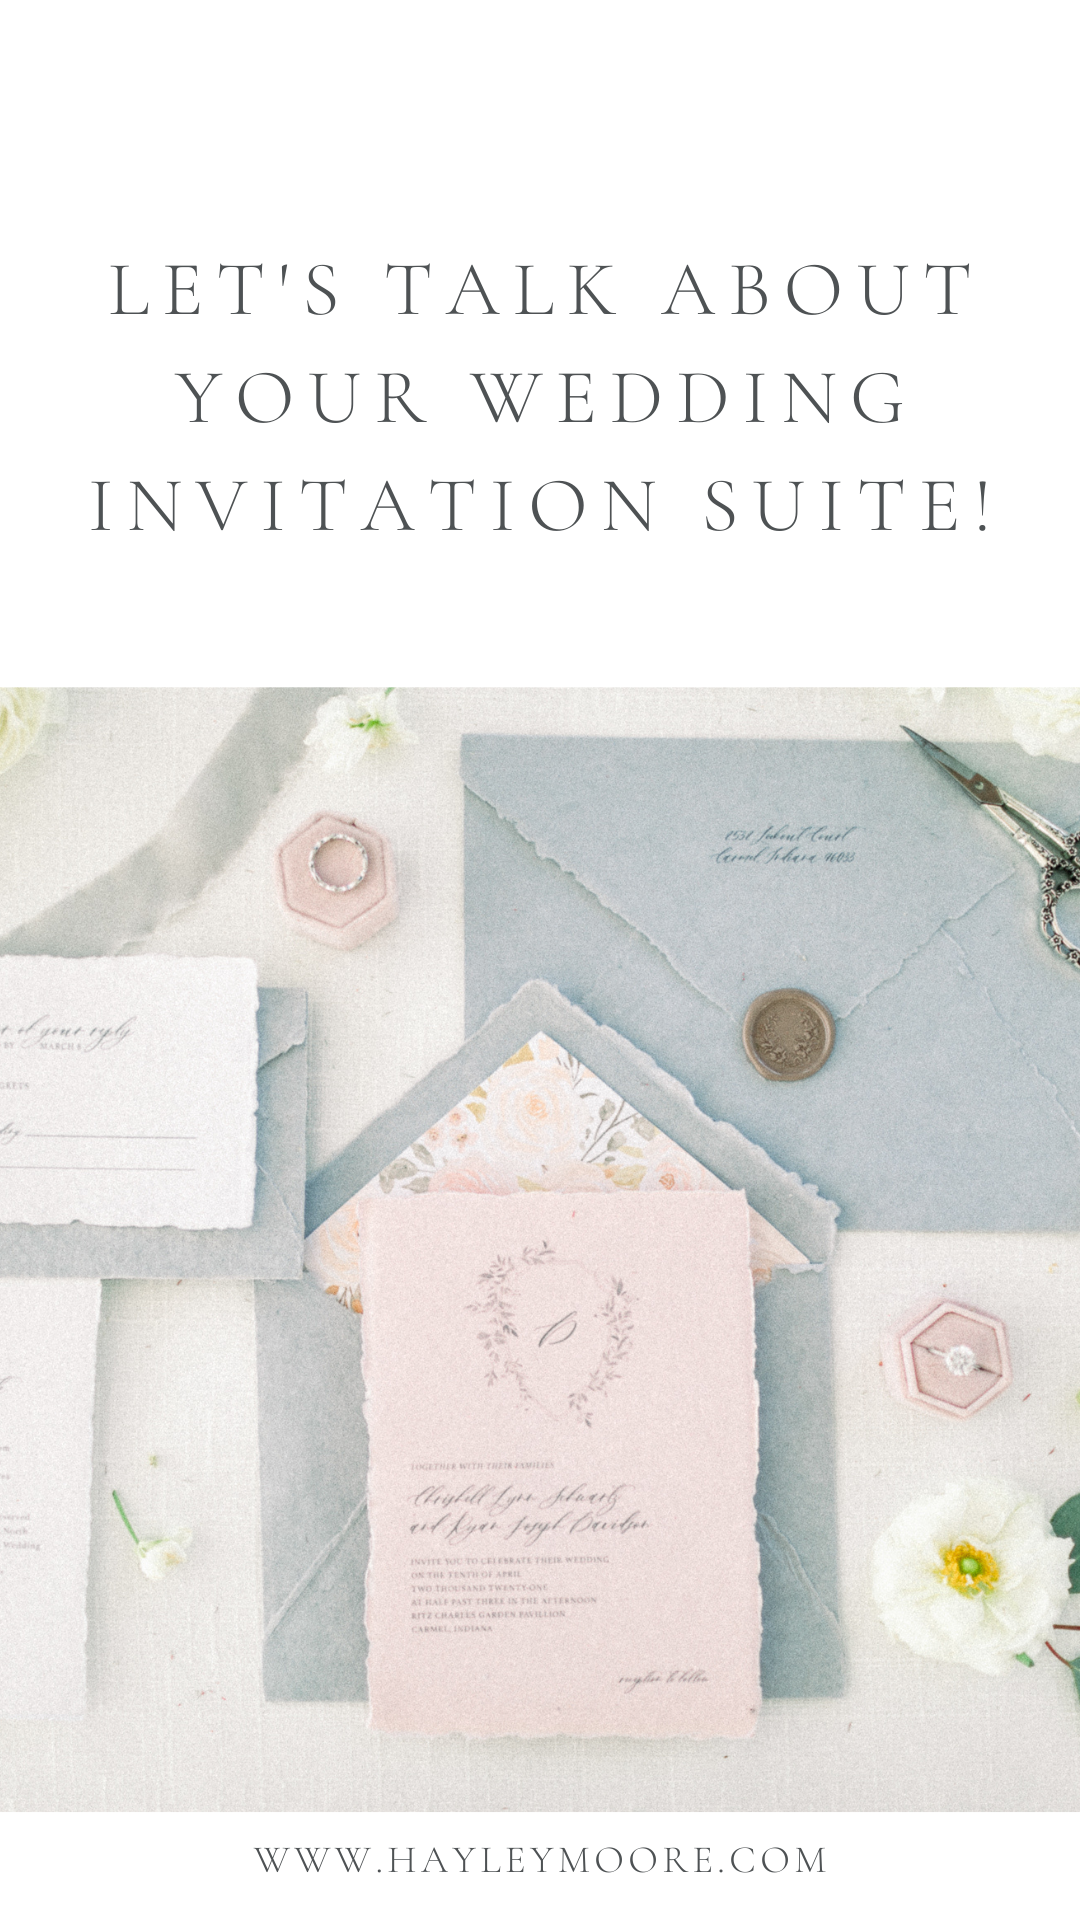 Let's Talk About Your Wedding Invitation Suite! | Hayley Moore Photography